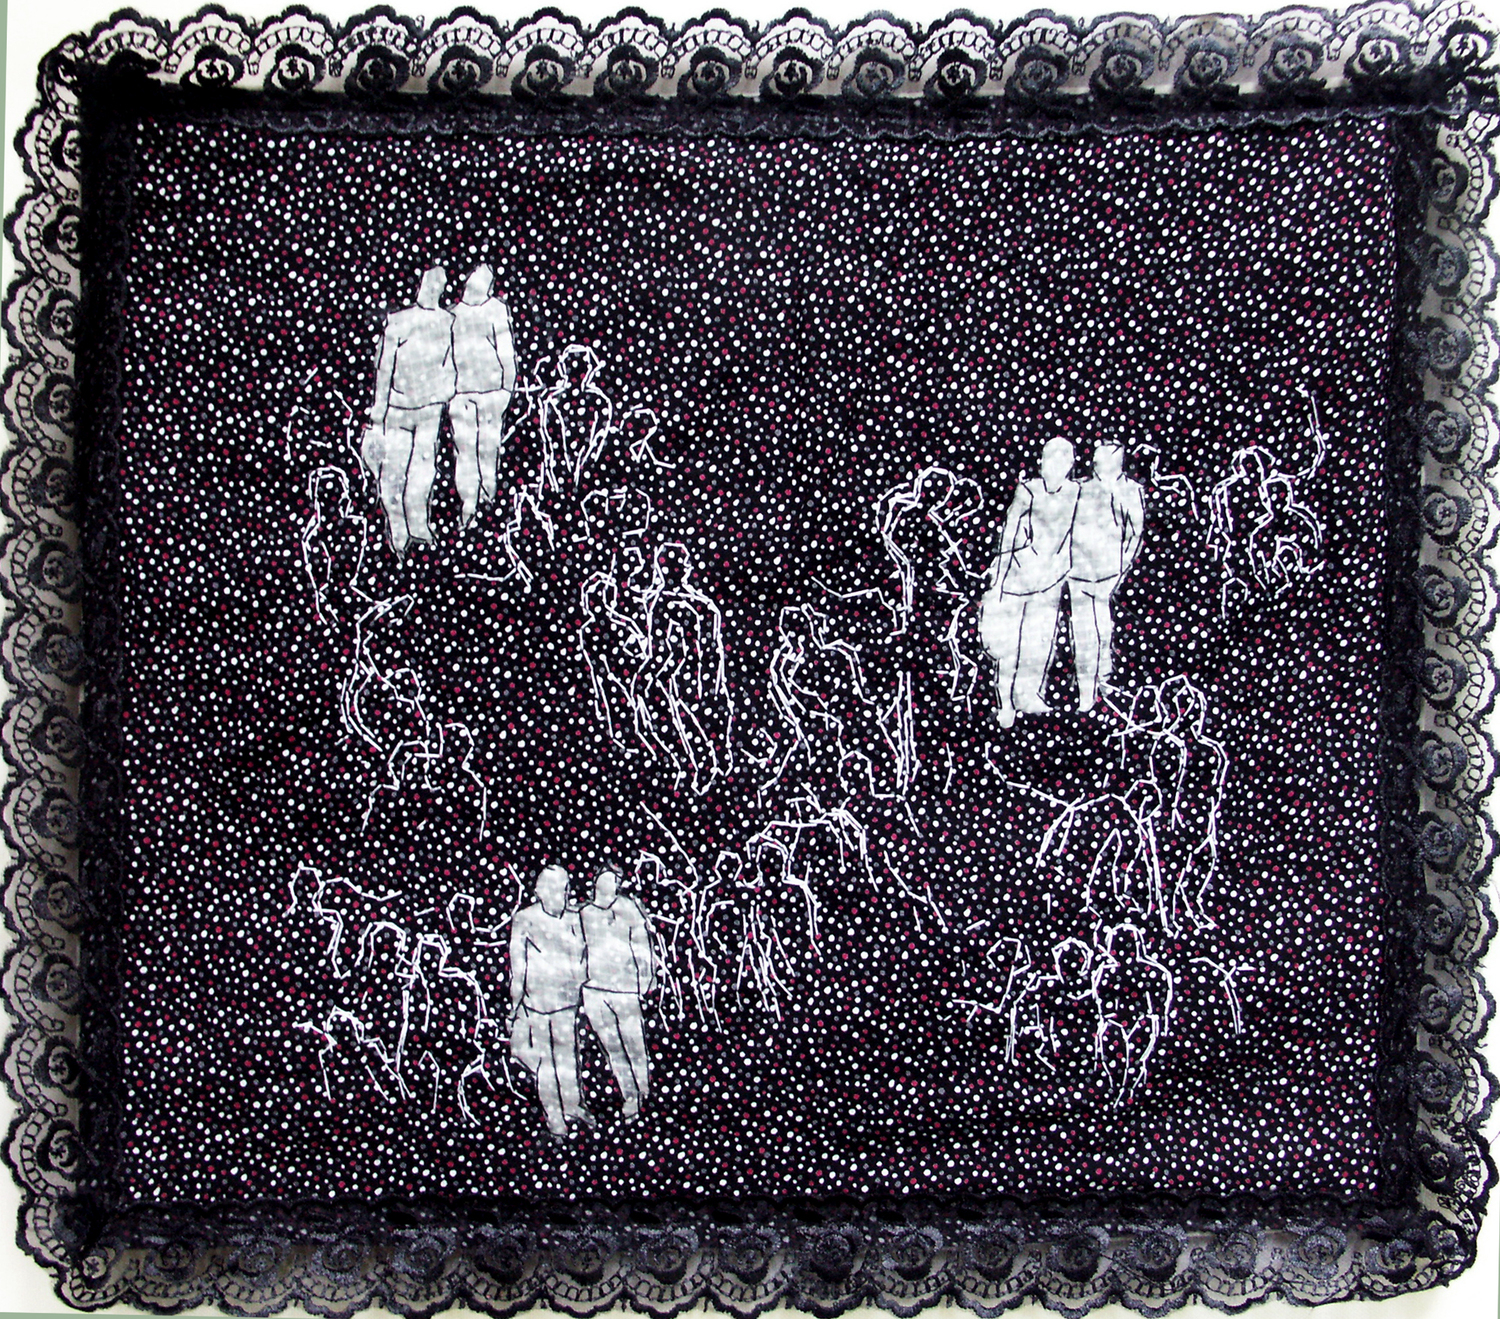  Do Not Push a Tantrum| &nbsp;Hand Sewing on Fabric | 40 x 30cm   